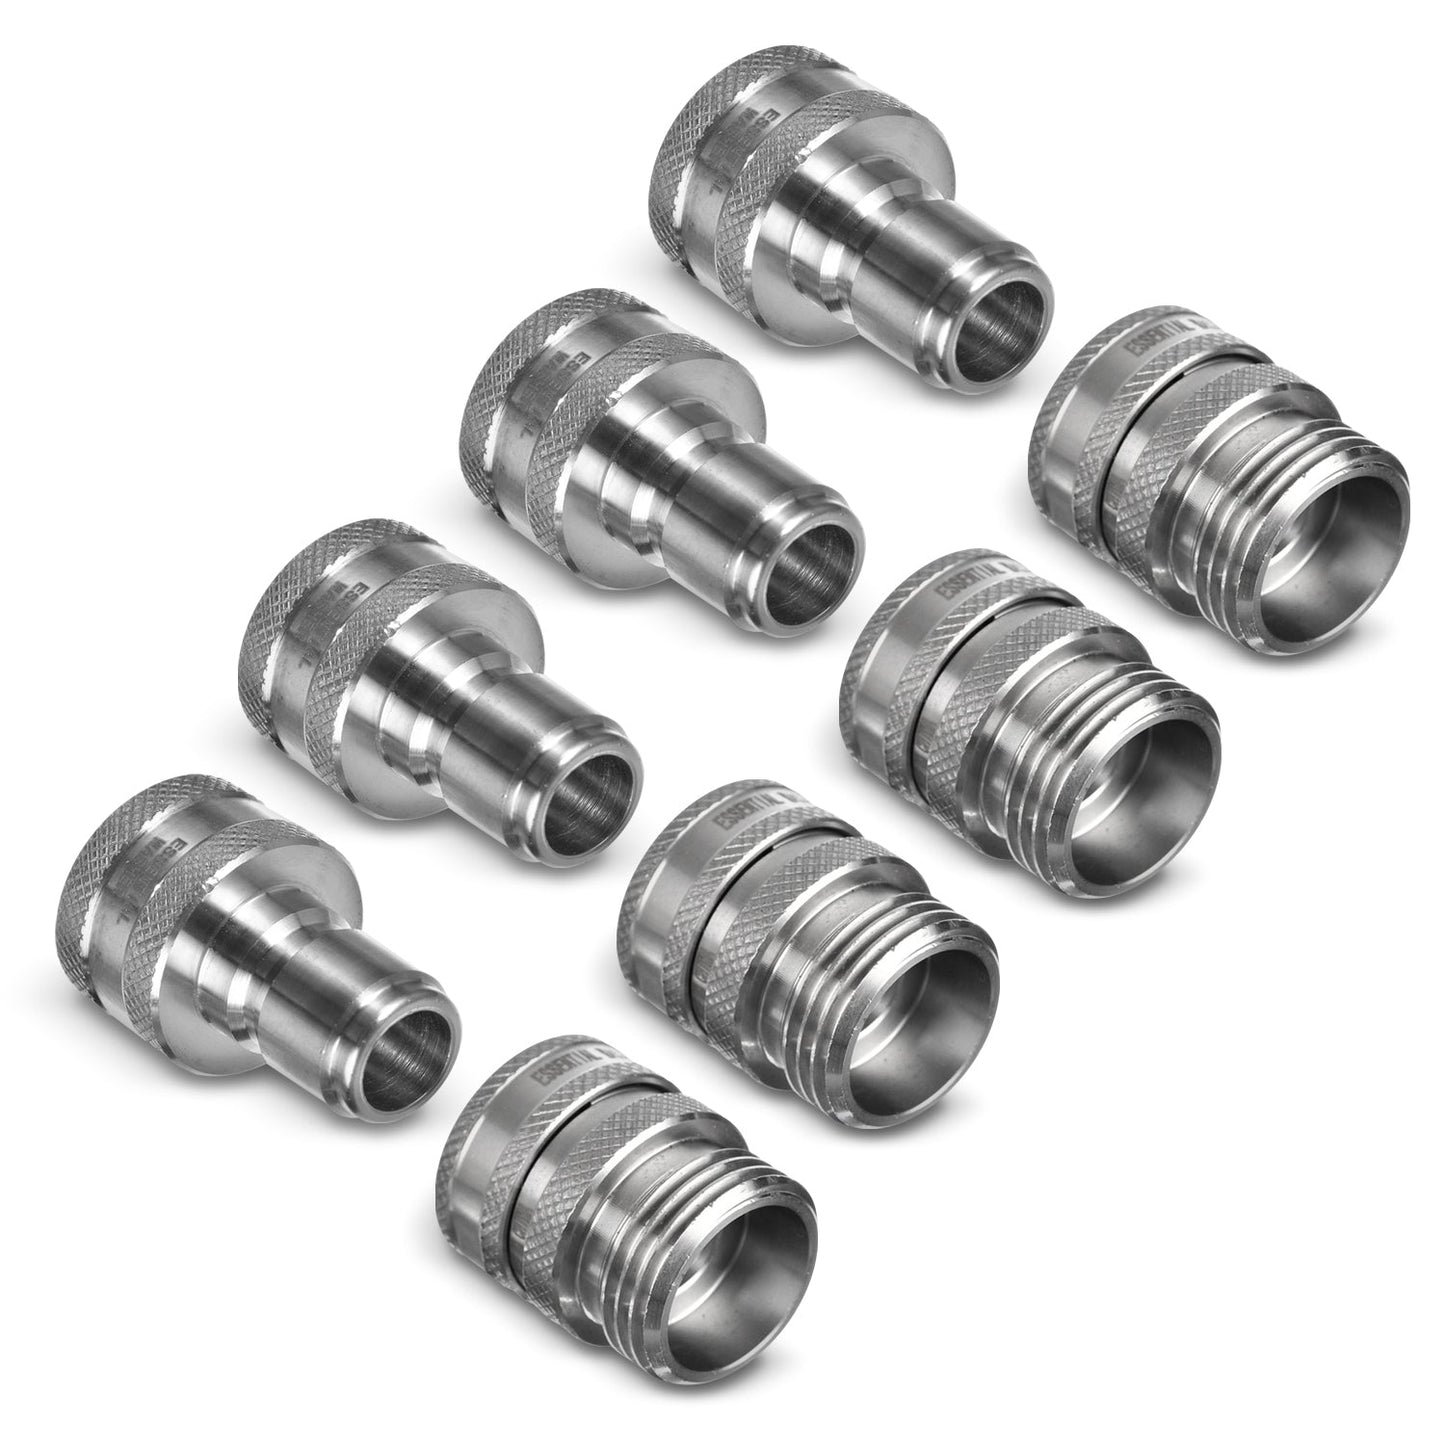 Redesigned 3/4" Garden Hose Quick Connect Set | Solid Stainless Steel Fittings